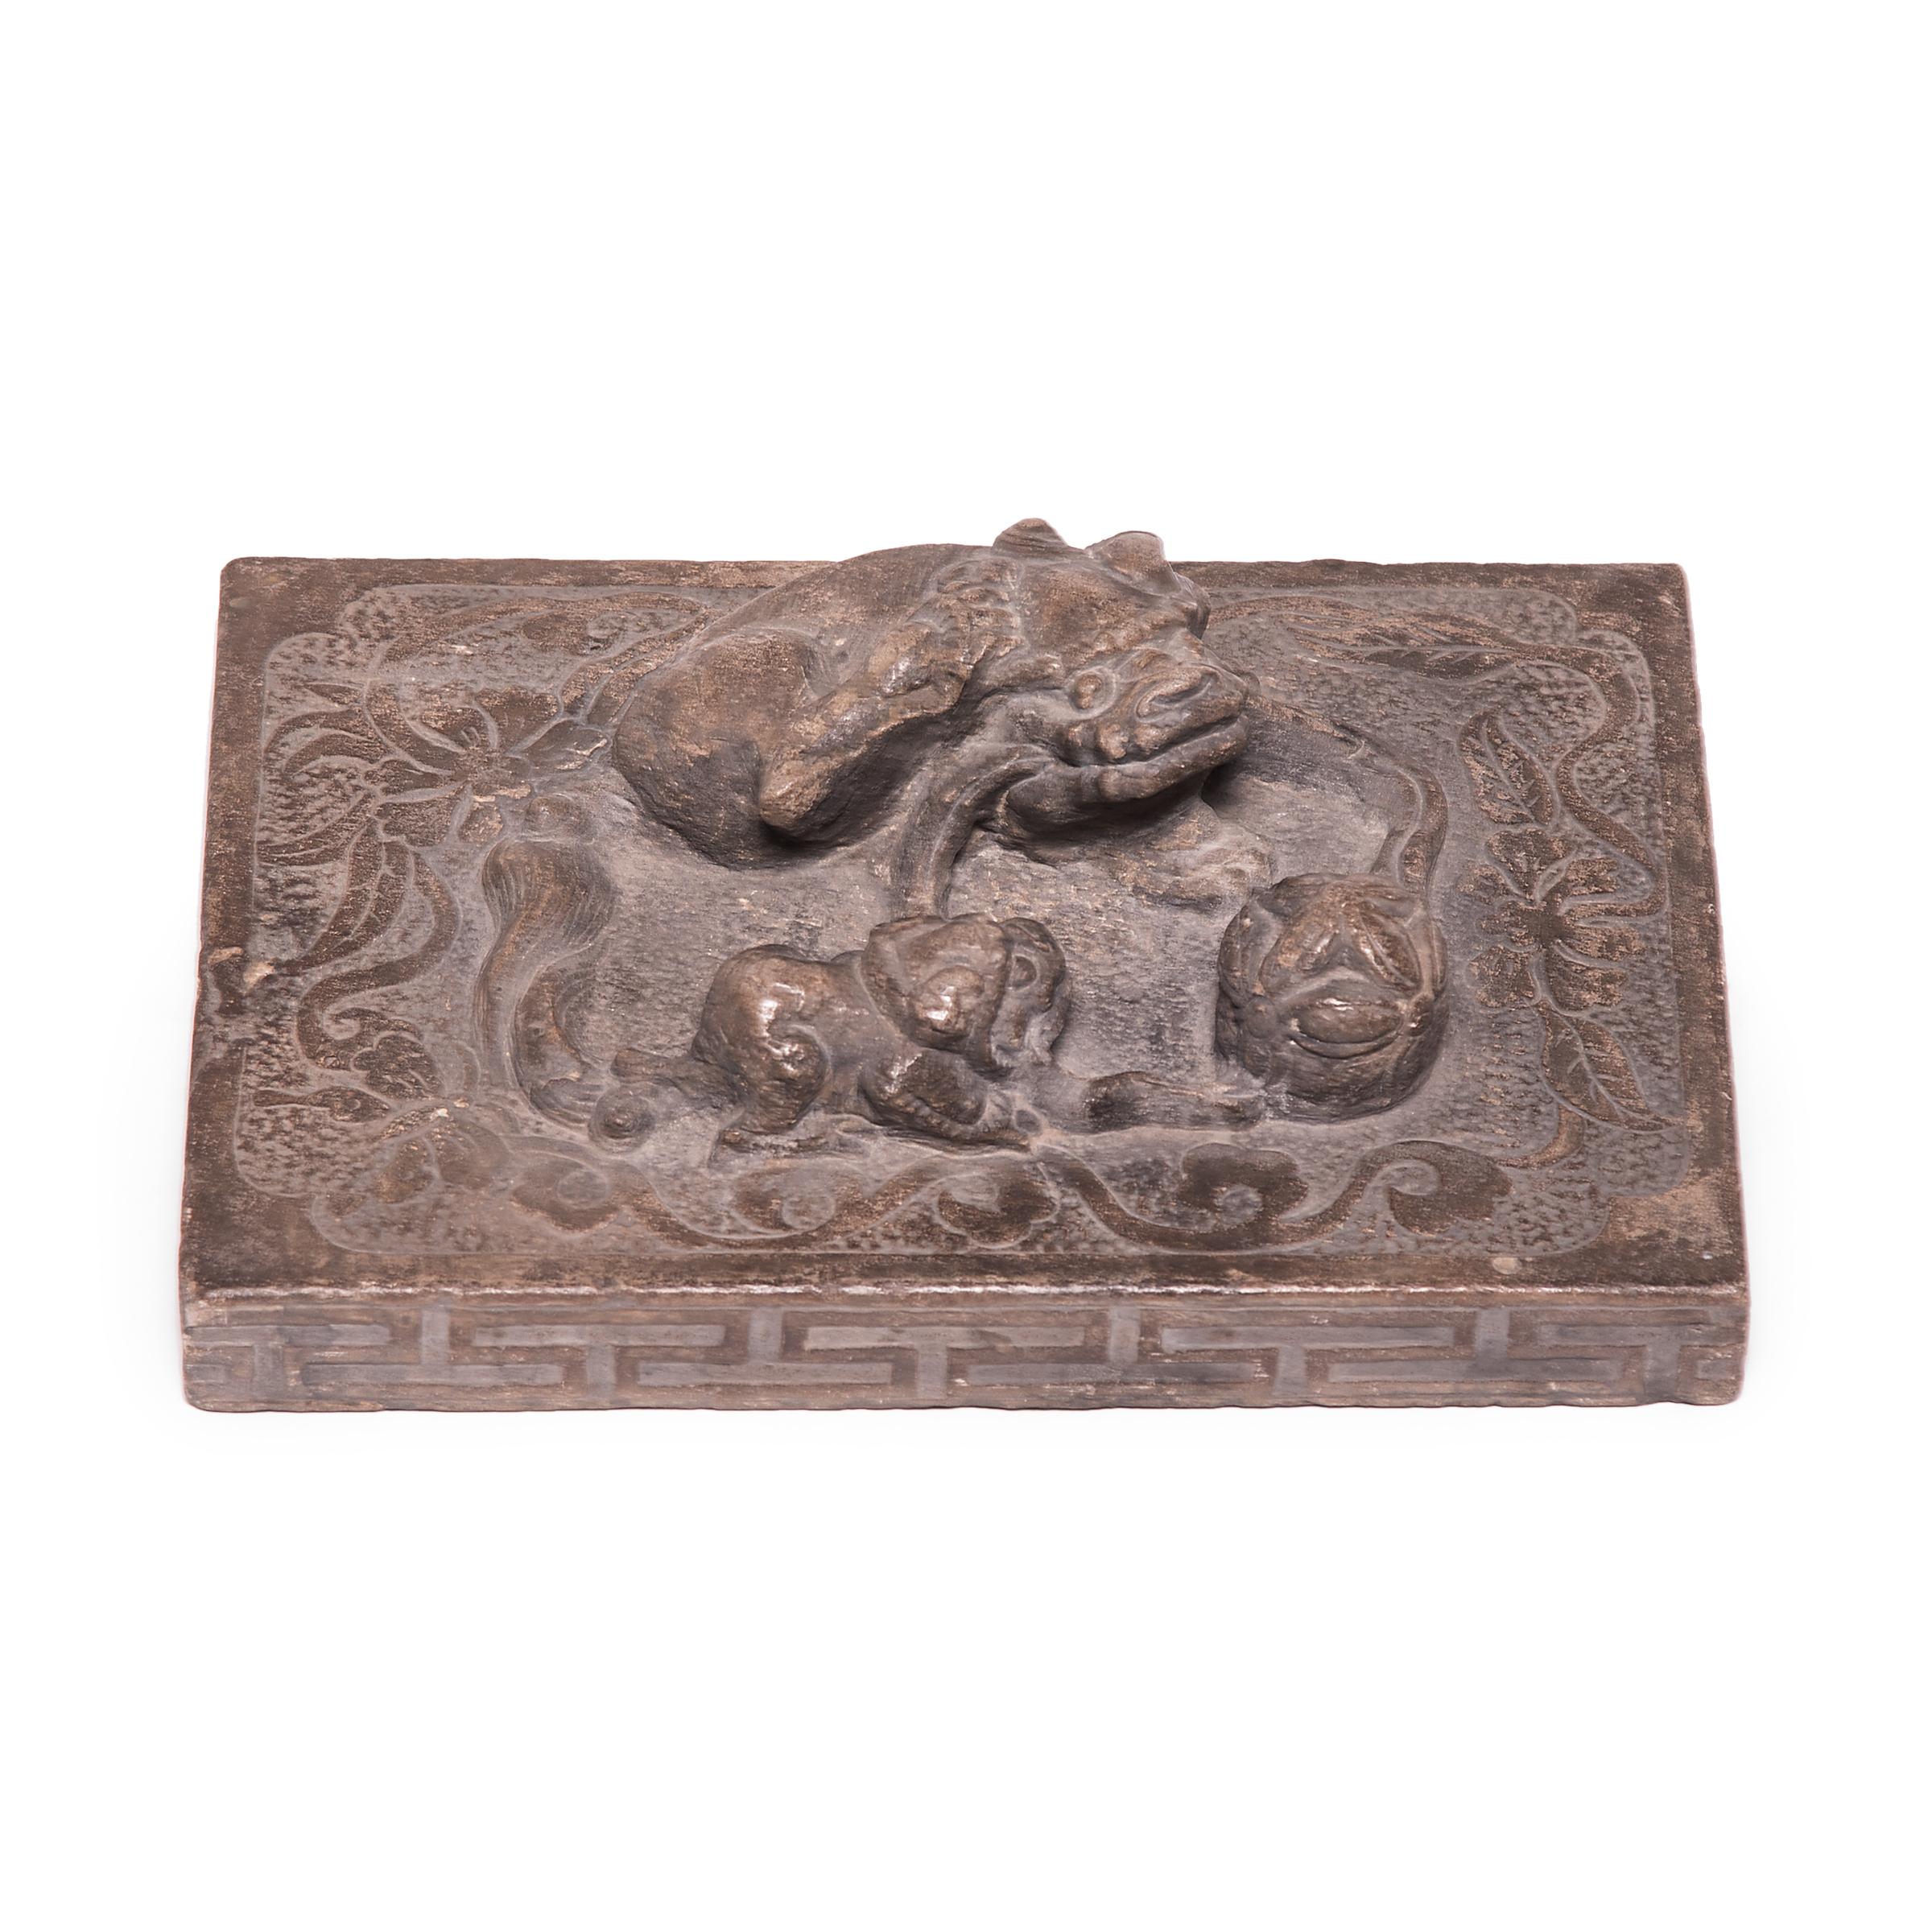 Chinese Stone Shoemaker's Weight with Mother, Cub, and Embroidered Ball For Sale